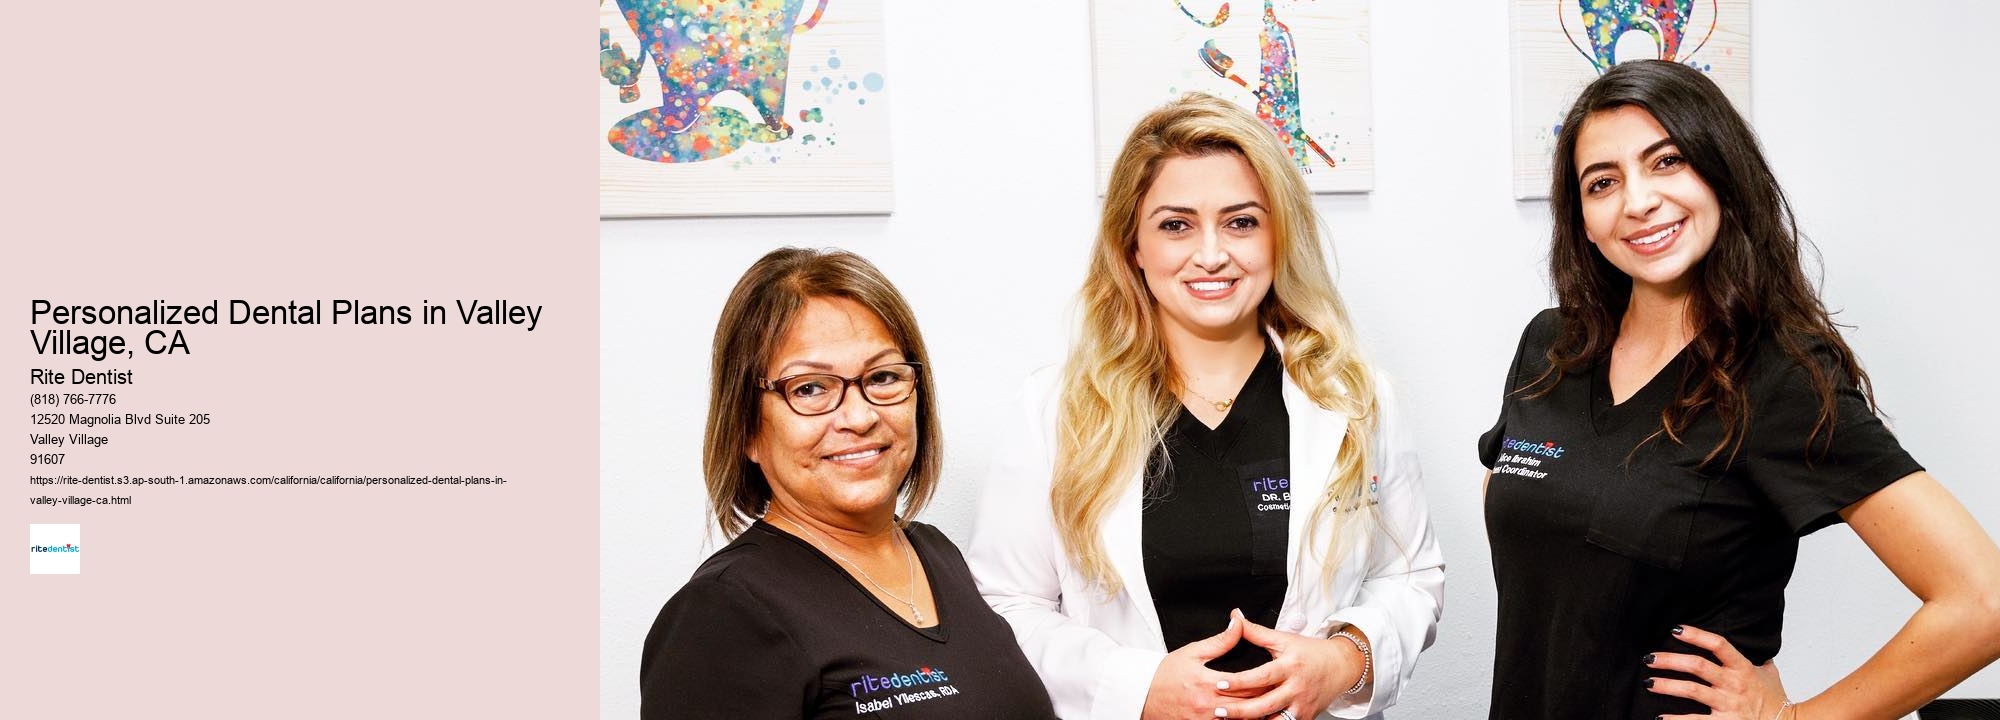 Personalized Dental Plans in Valley Village, CA